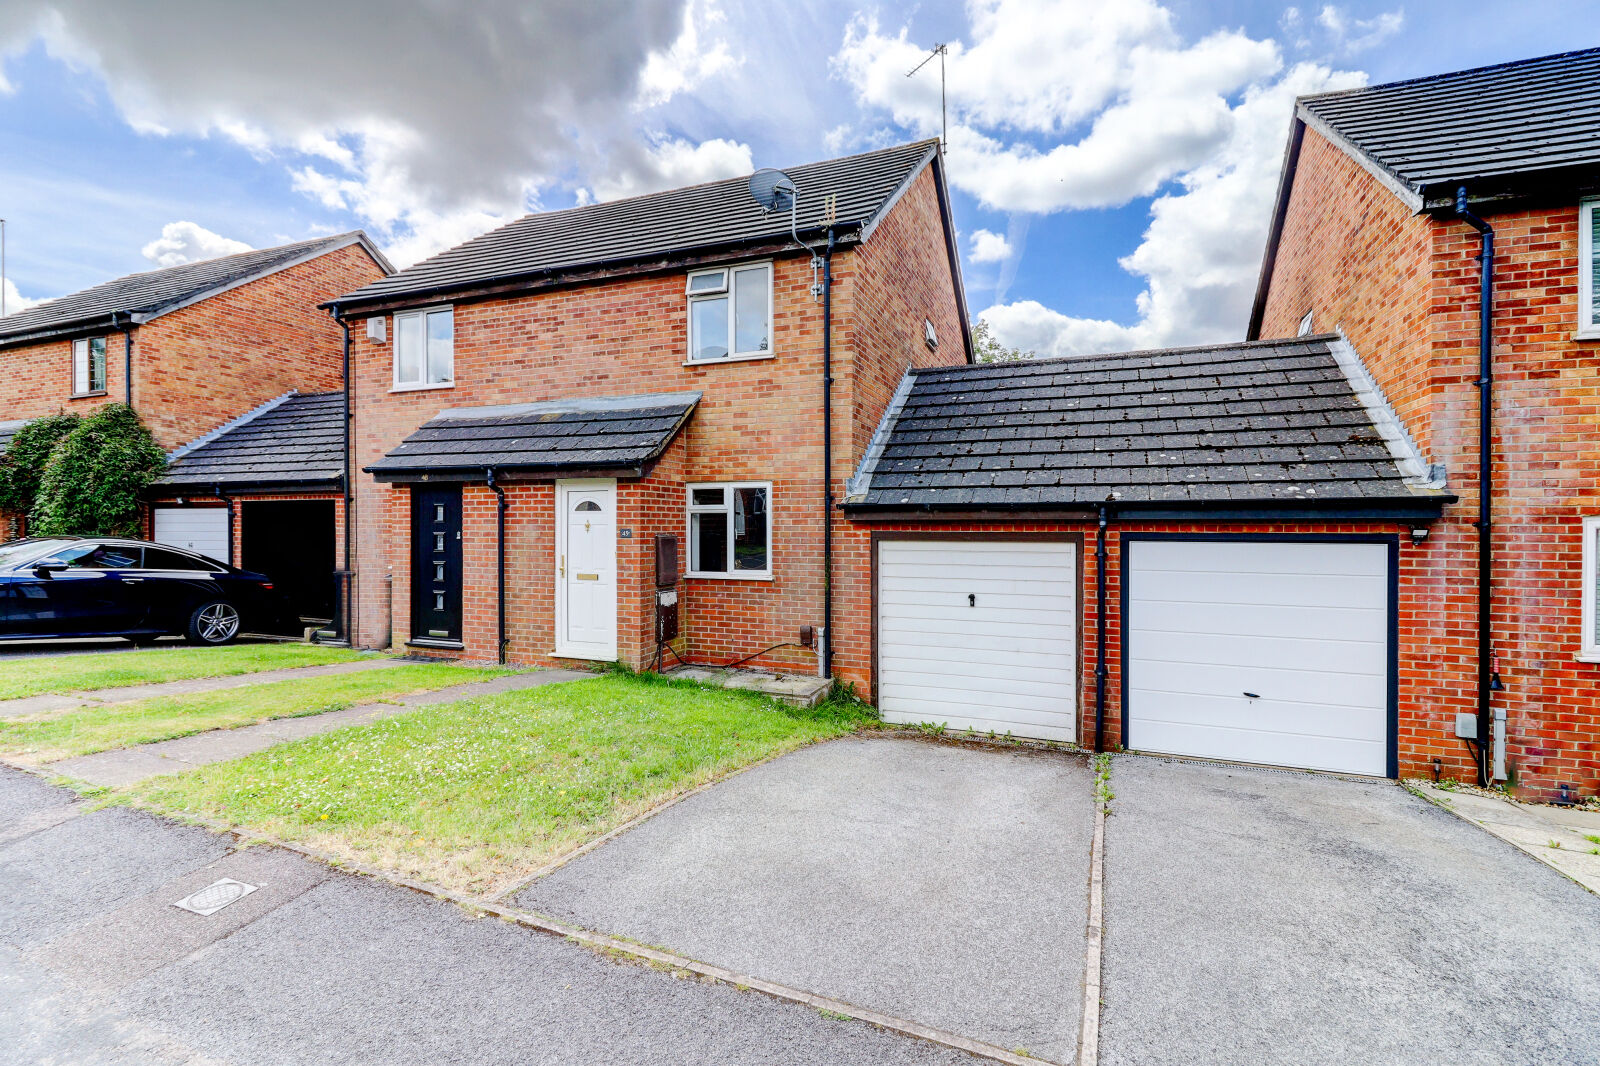 2 bedroom semi detached house for sale Miersfield, High Wycombe, HP11, main image